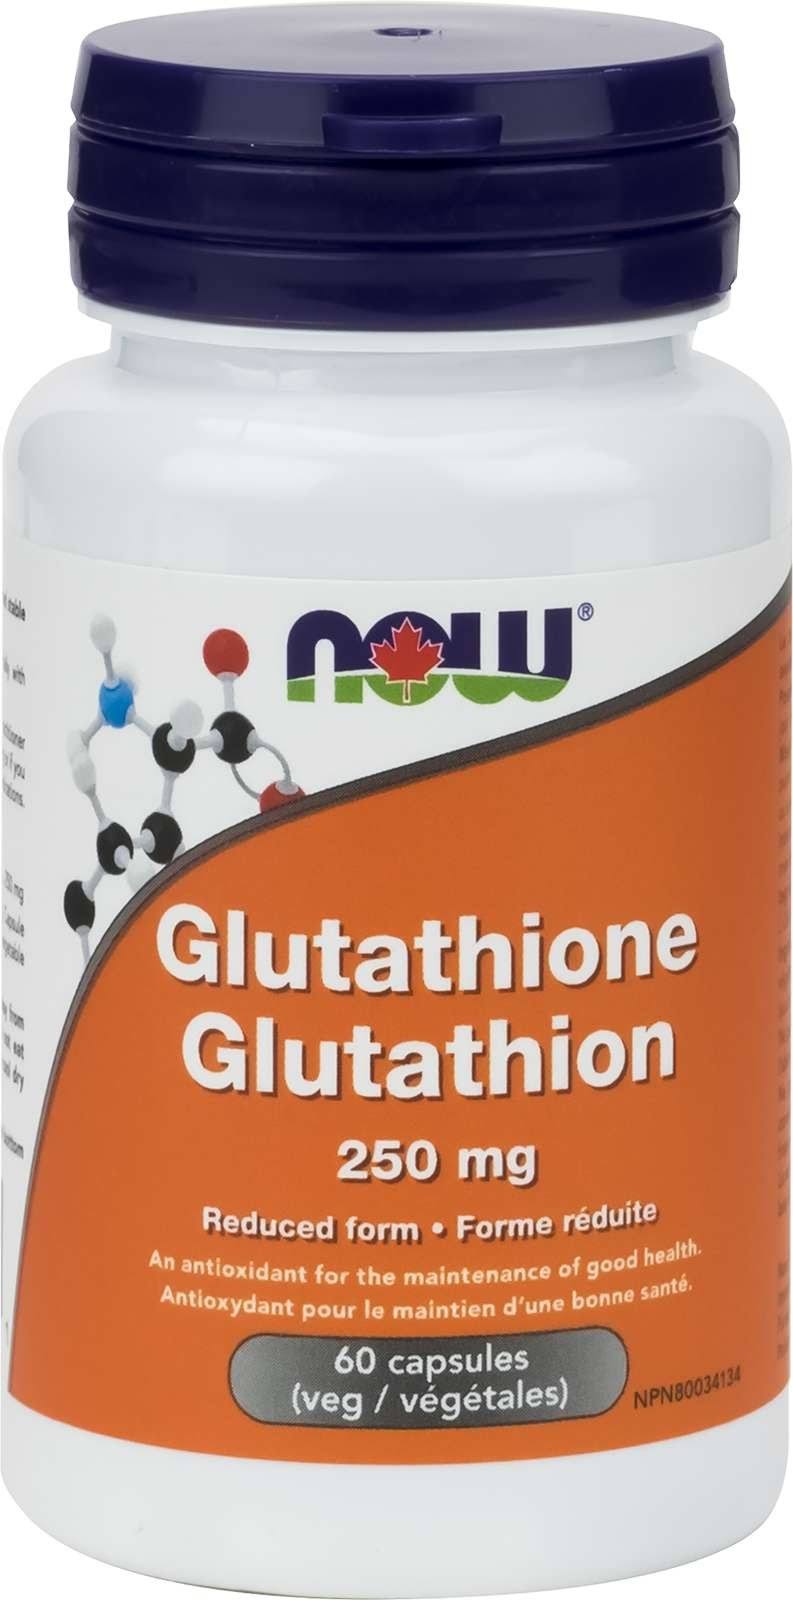 Now Glutathione Supplement - 250mg, 60 Capsules